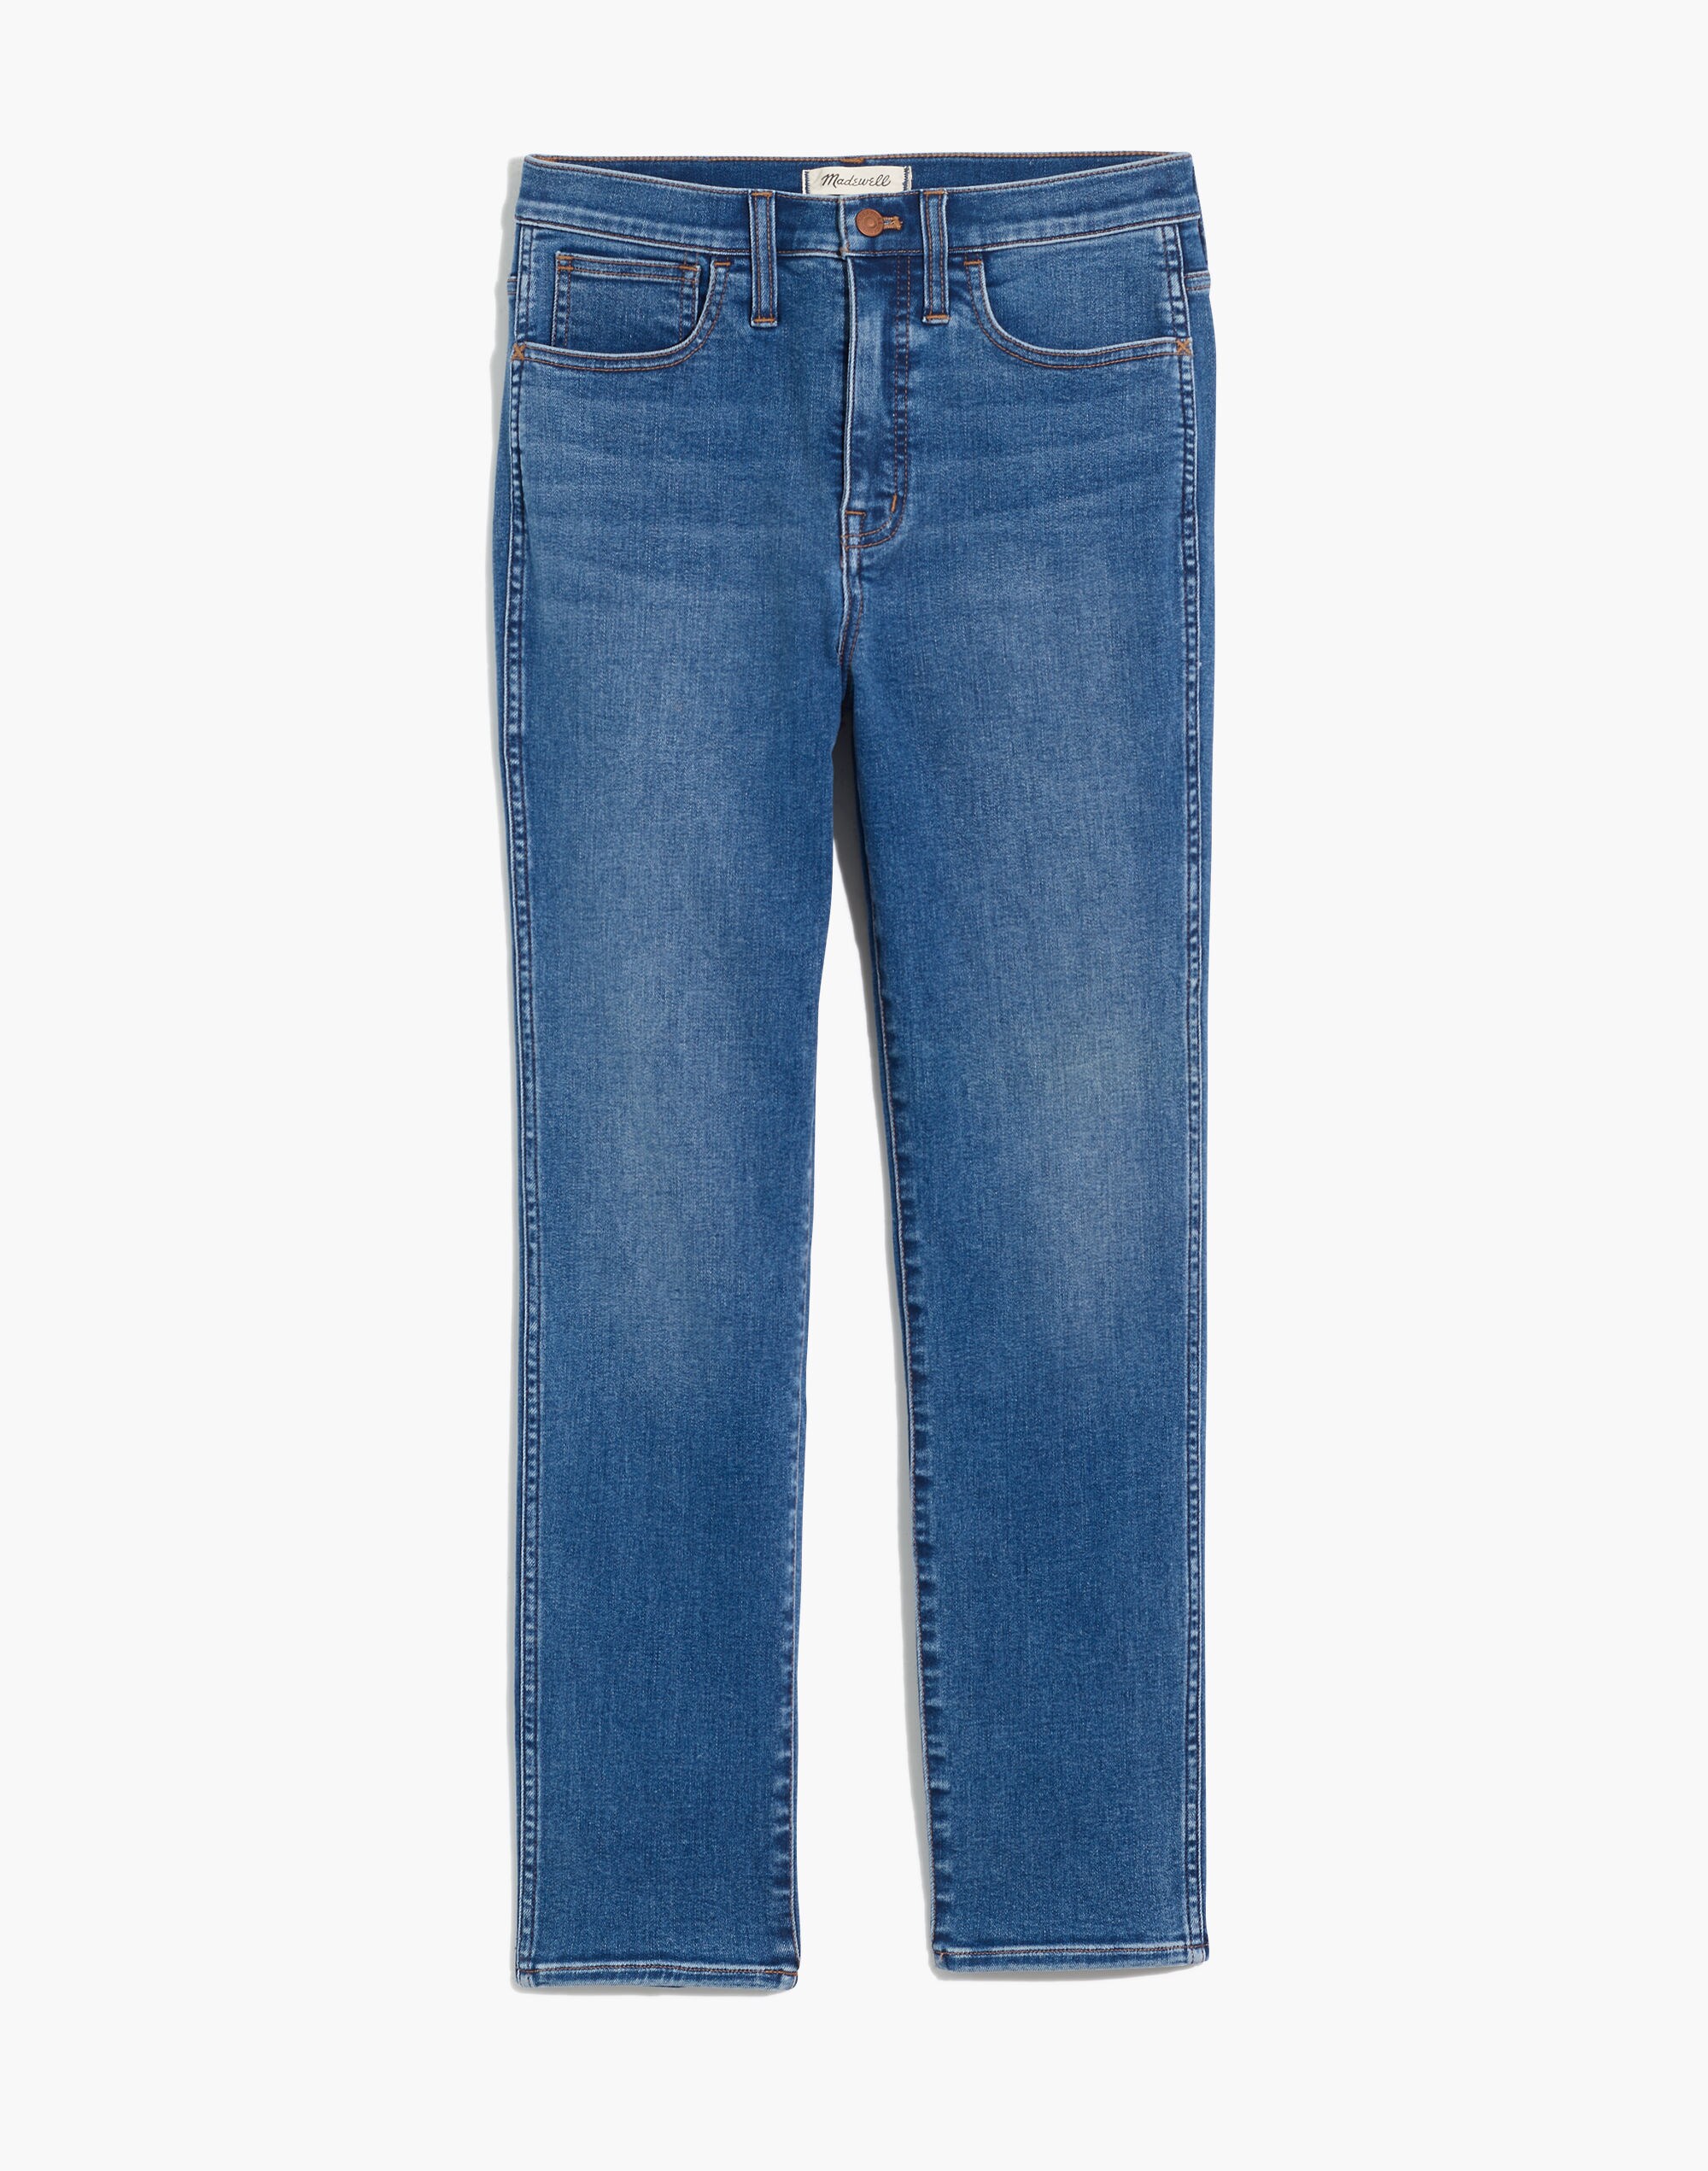 Madewell Jeans Style J9527 Tag Size W34 L32(31) see measuremnt Slim  Straight NWT